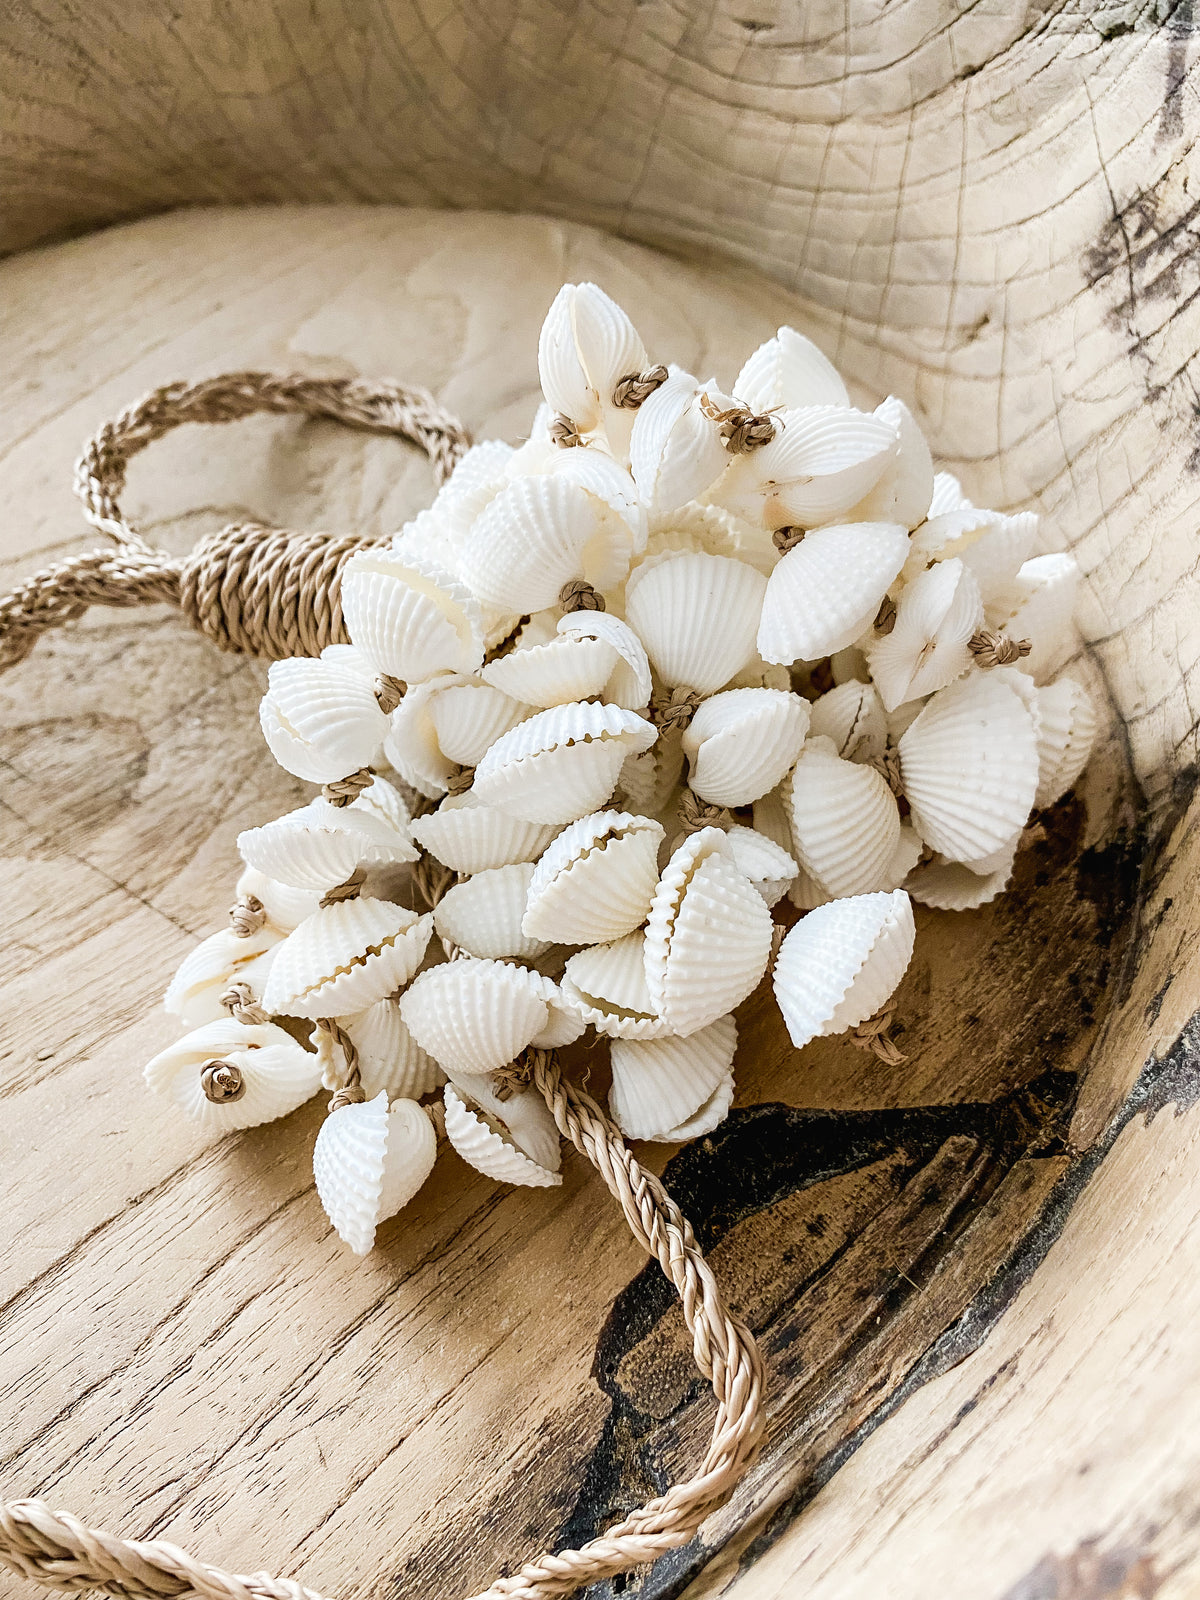 A cluster of natural scallop shells carefully strung together from a braided Jute base.   These gorgeous tassels can hang from a wall hook, door knob or be draped over a shelf. Simply place on a stack of books on a side table, use over a decorative bowl or add to an existing centrepiece on your hall or coffee table to level up your styling game.  